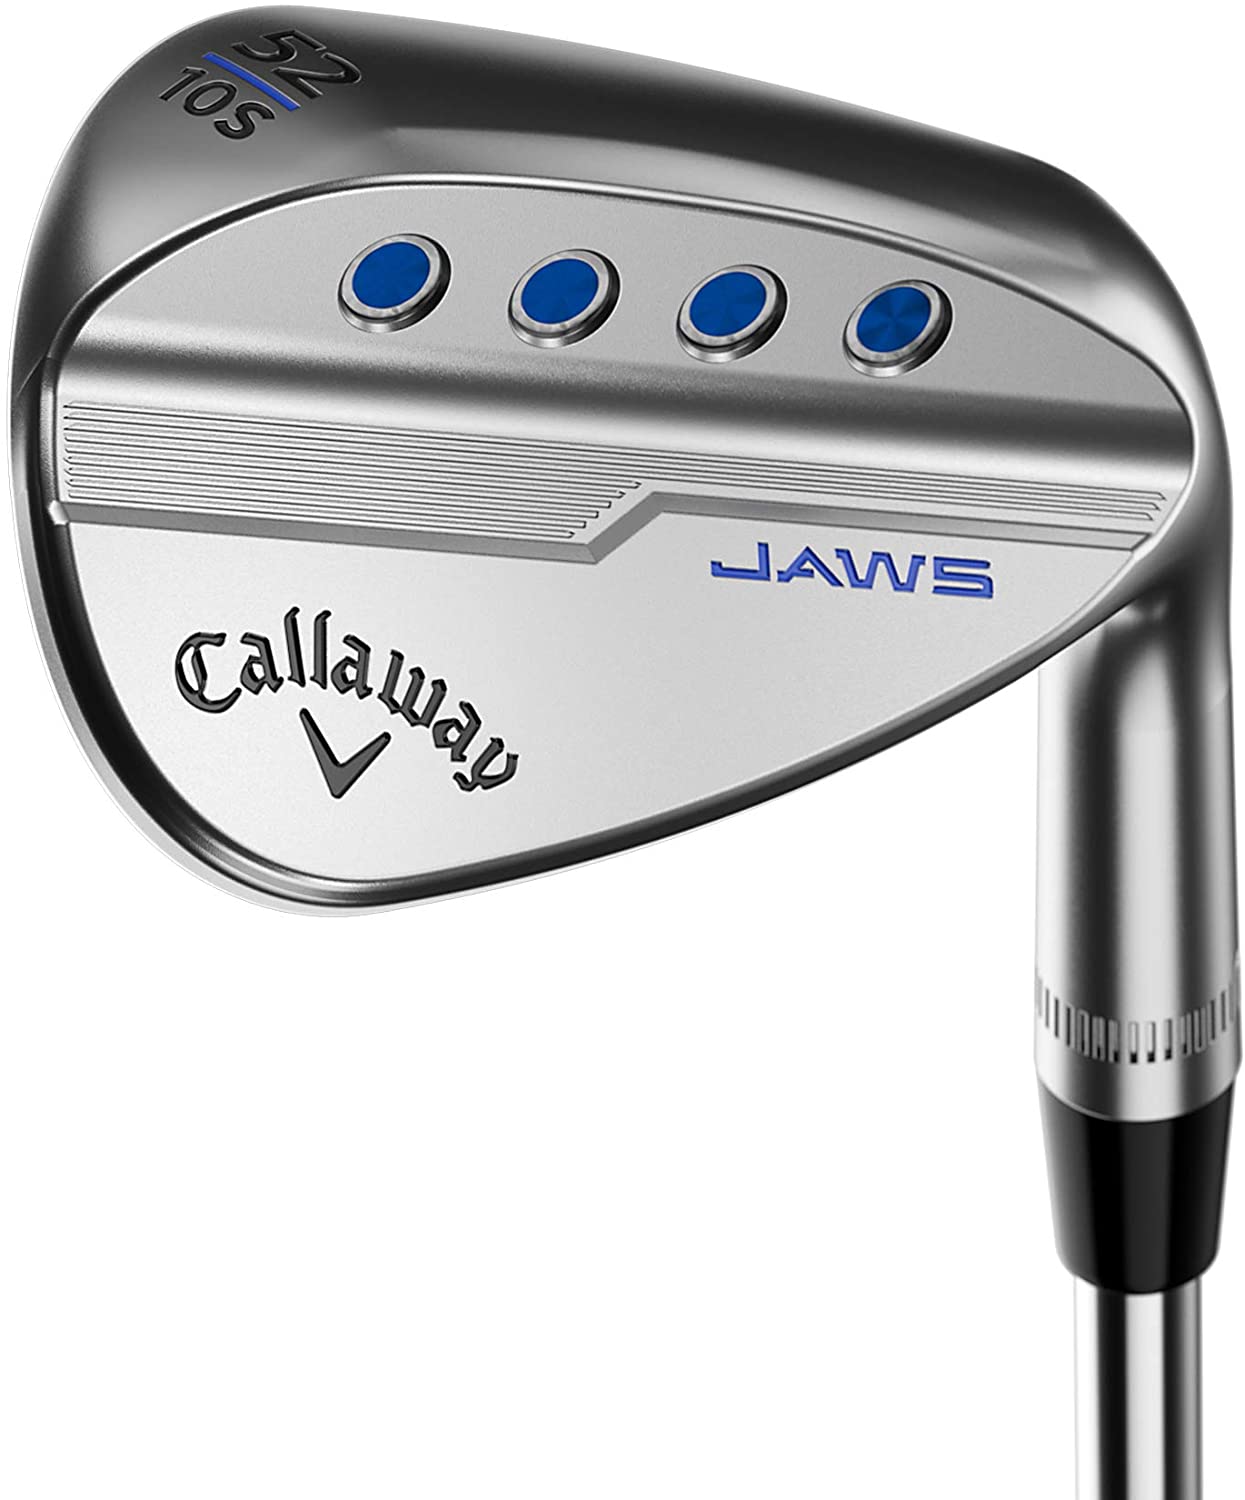 Callaway Golf Mack Daddy 5 JAWS Wedge Review